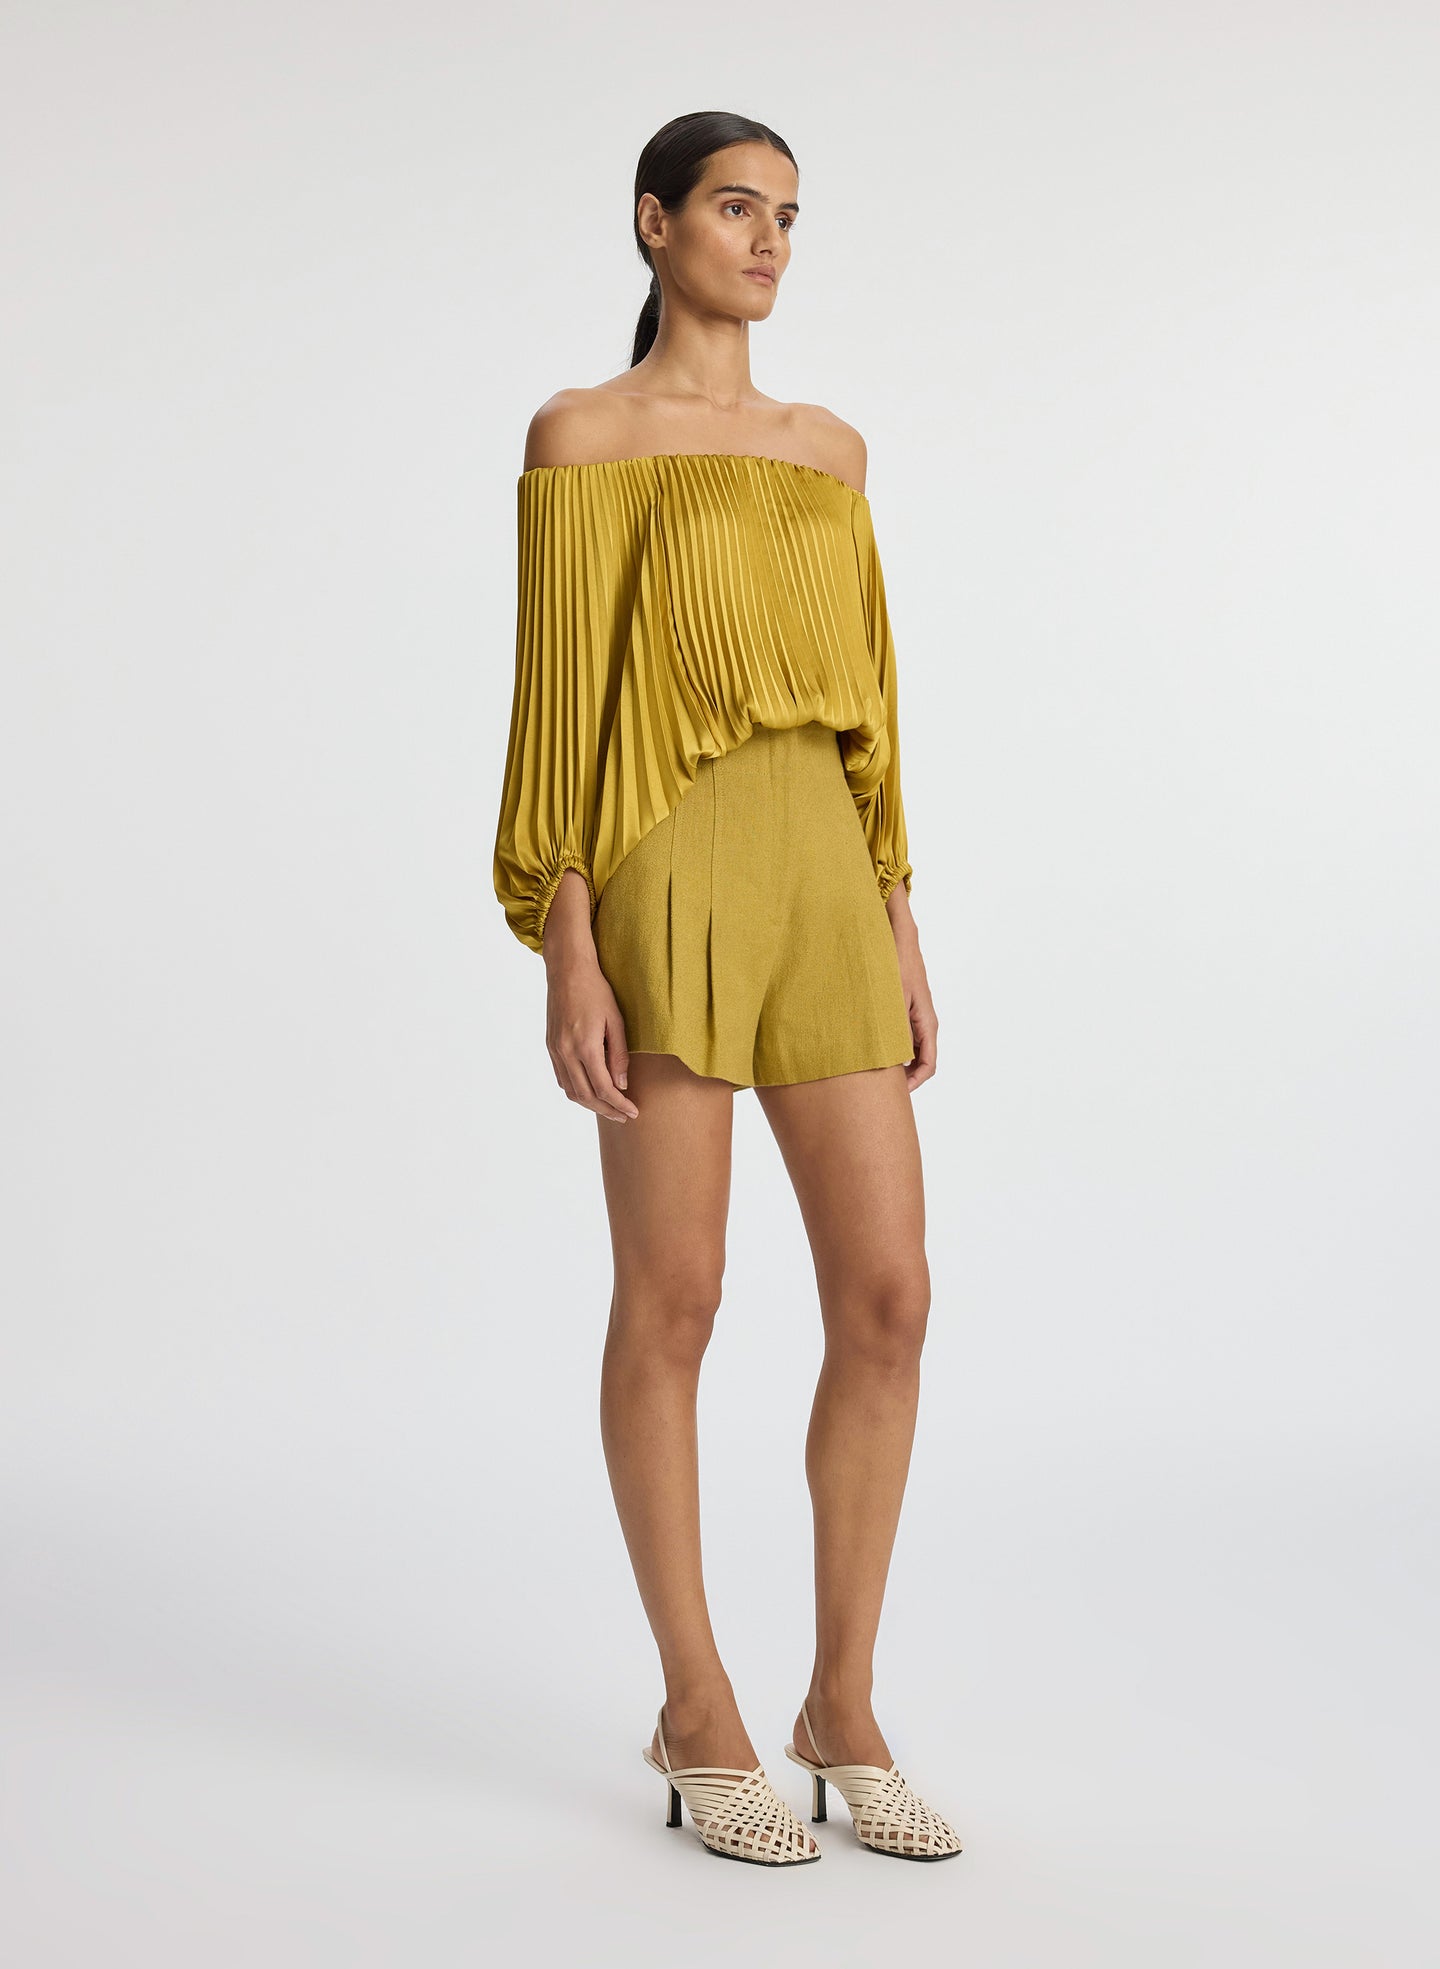 view of woman wearing yellow pleated off shoulder top and yellow shorts